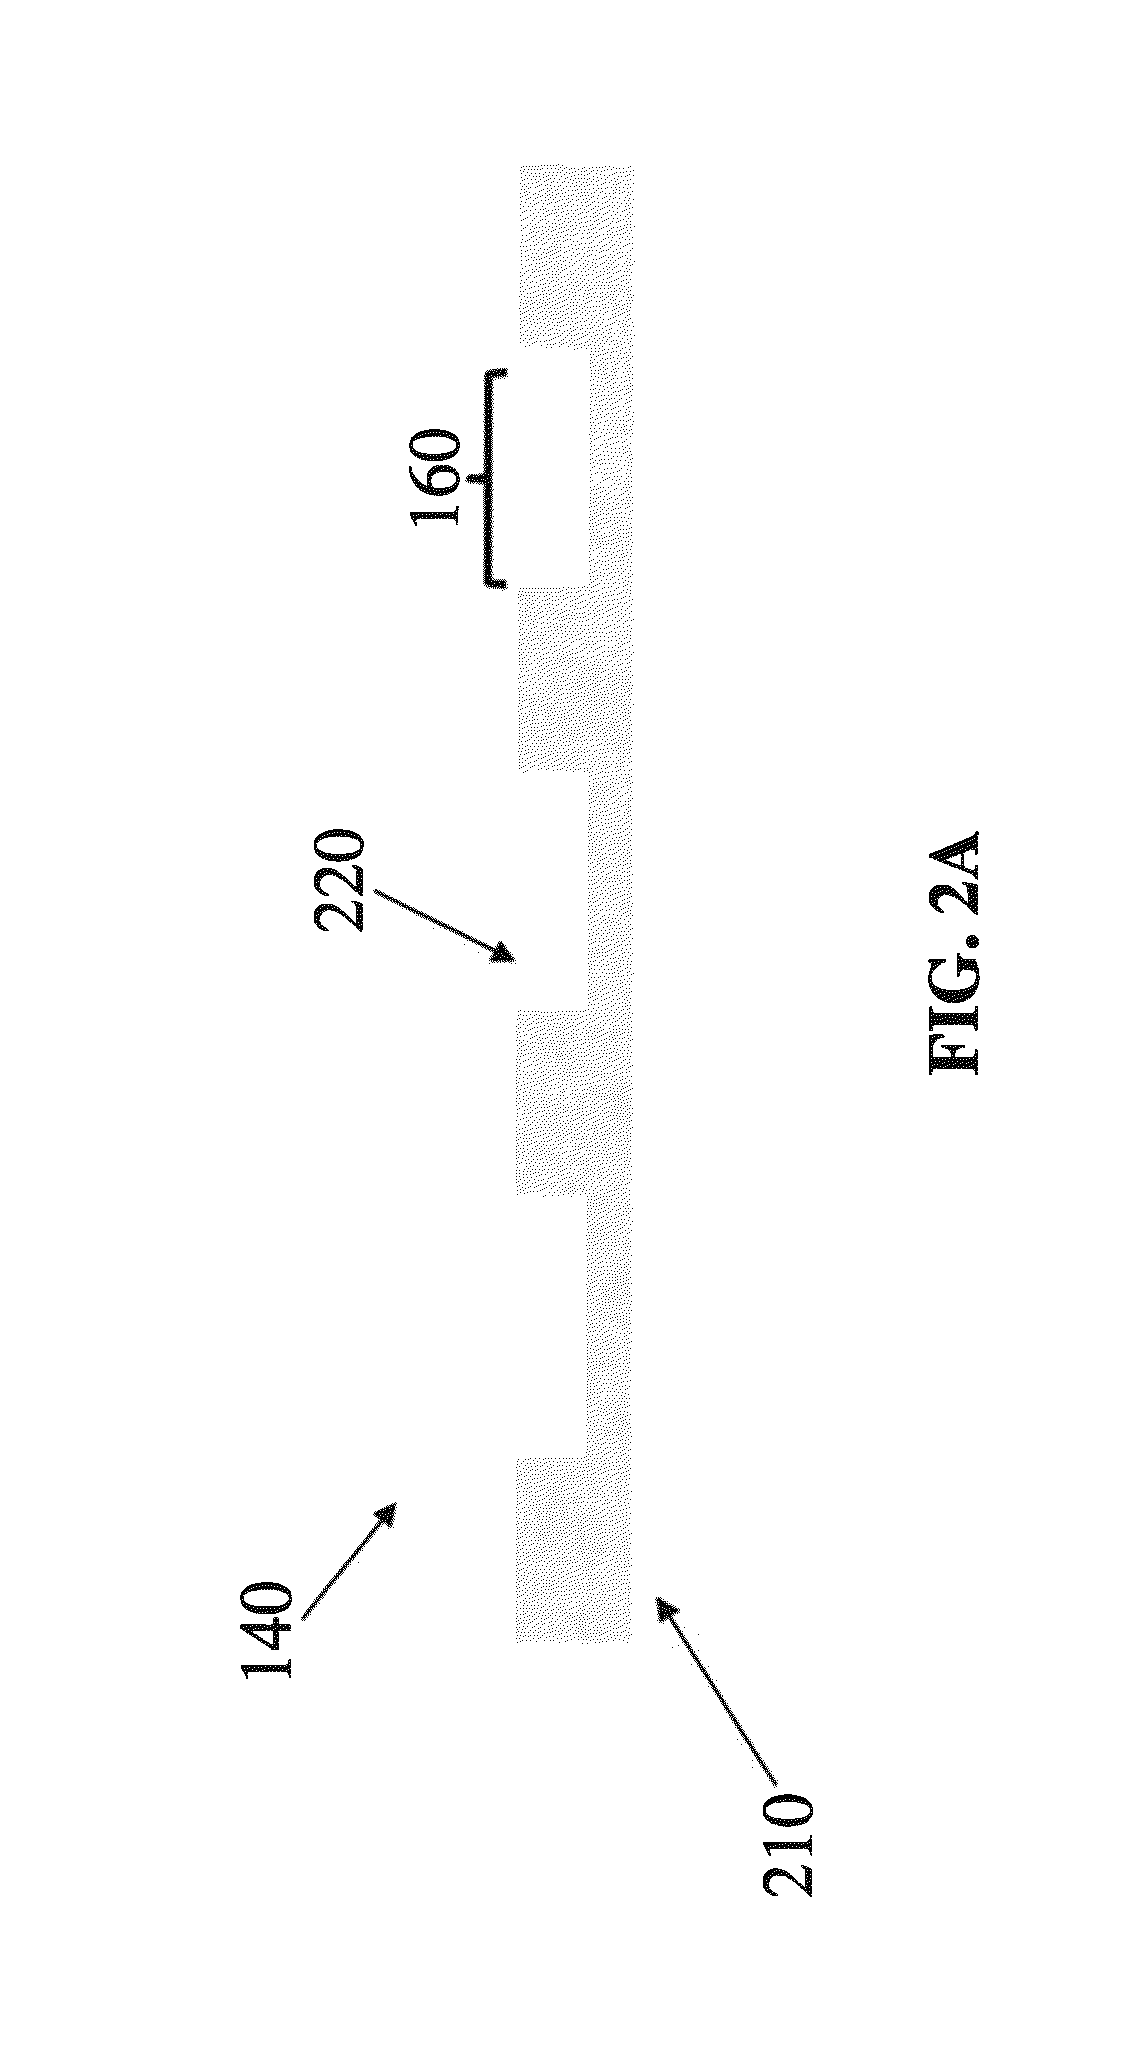 Method of stress relief in anti-reflective coated cap wafers for wafer level packaged infrared focal plane arrays